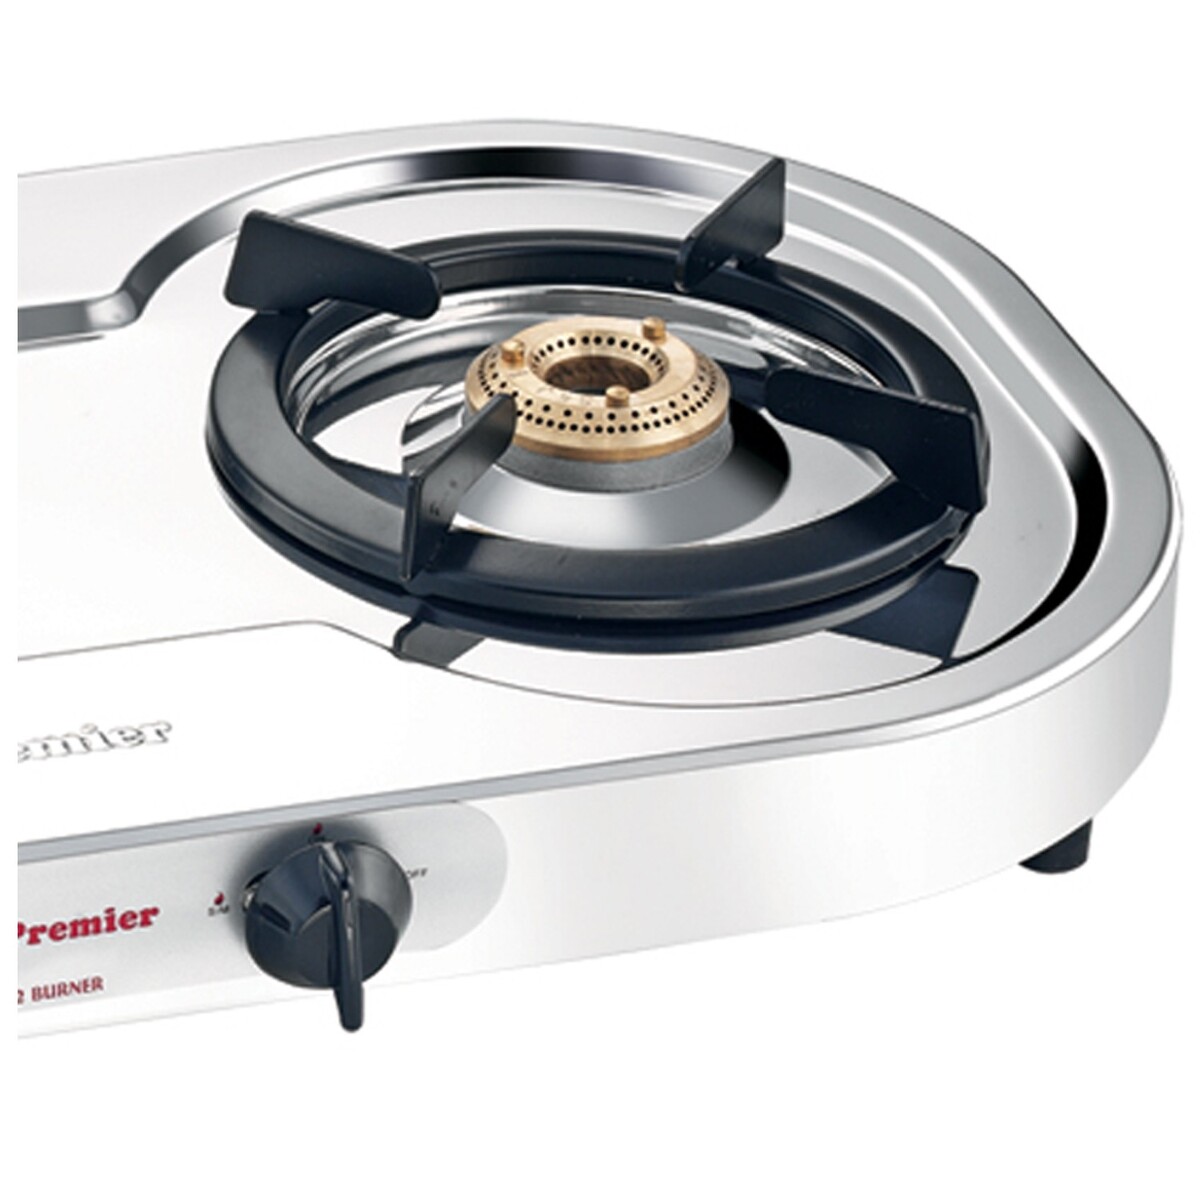 Premier Oval Stainless Steel Gas Stove 2 Burner